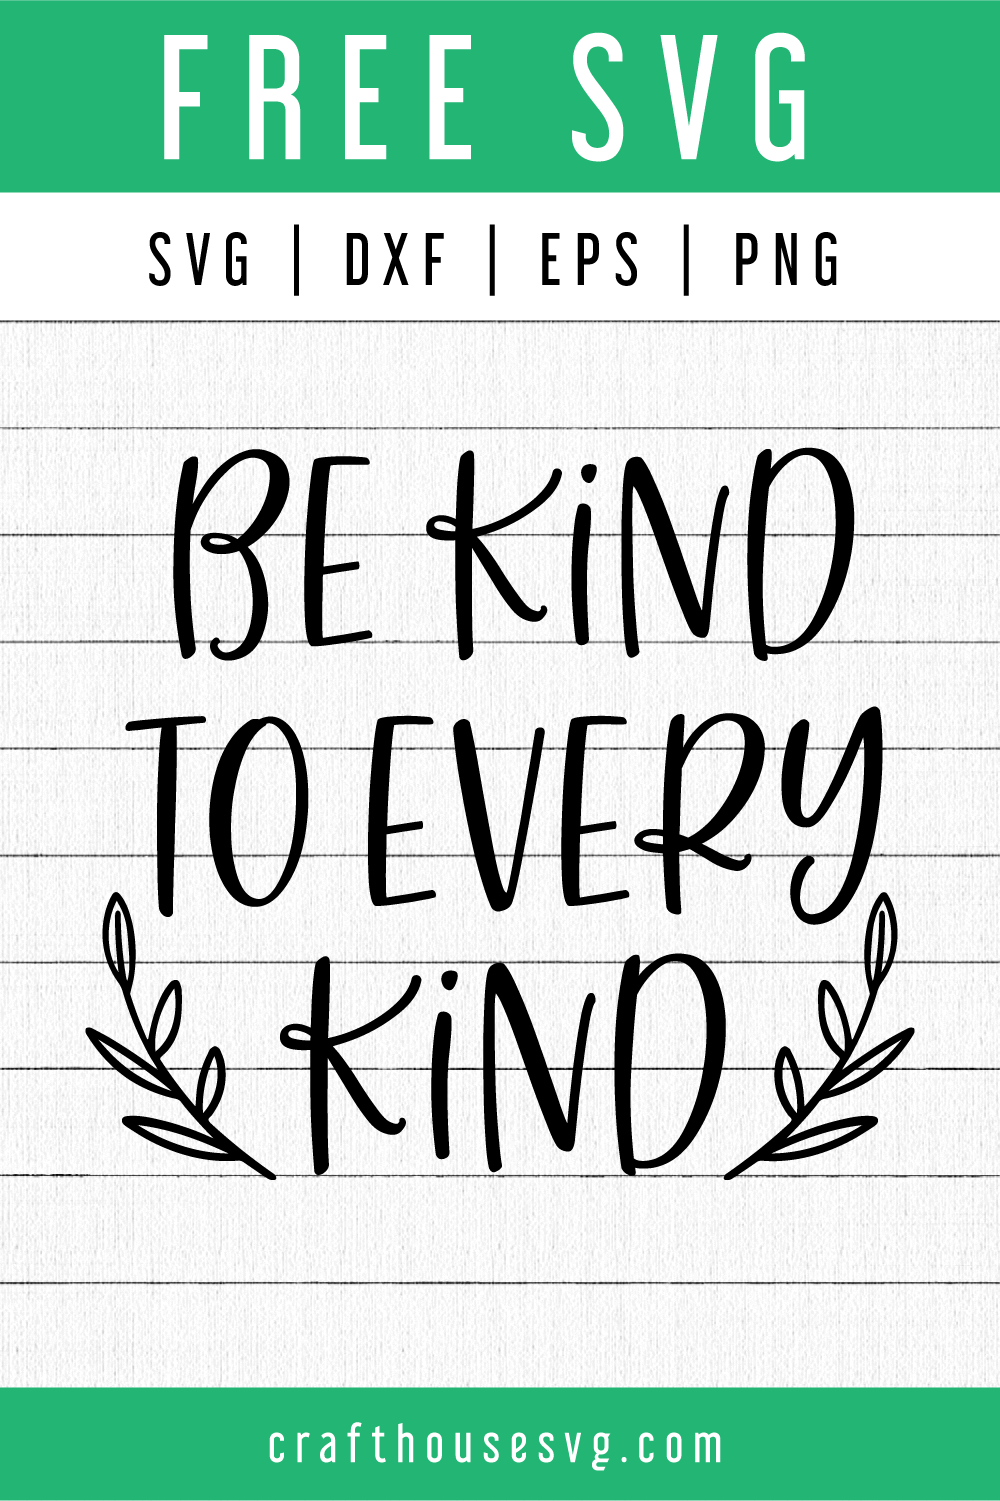 FREE Be kind to every kind SVG | FB120 Craft House SVG - SVG files for Cricut and Silhouette